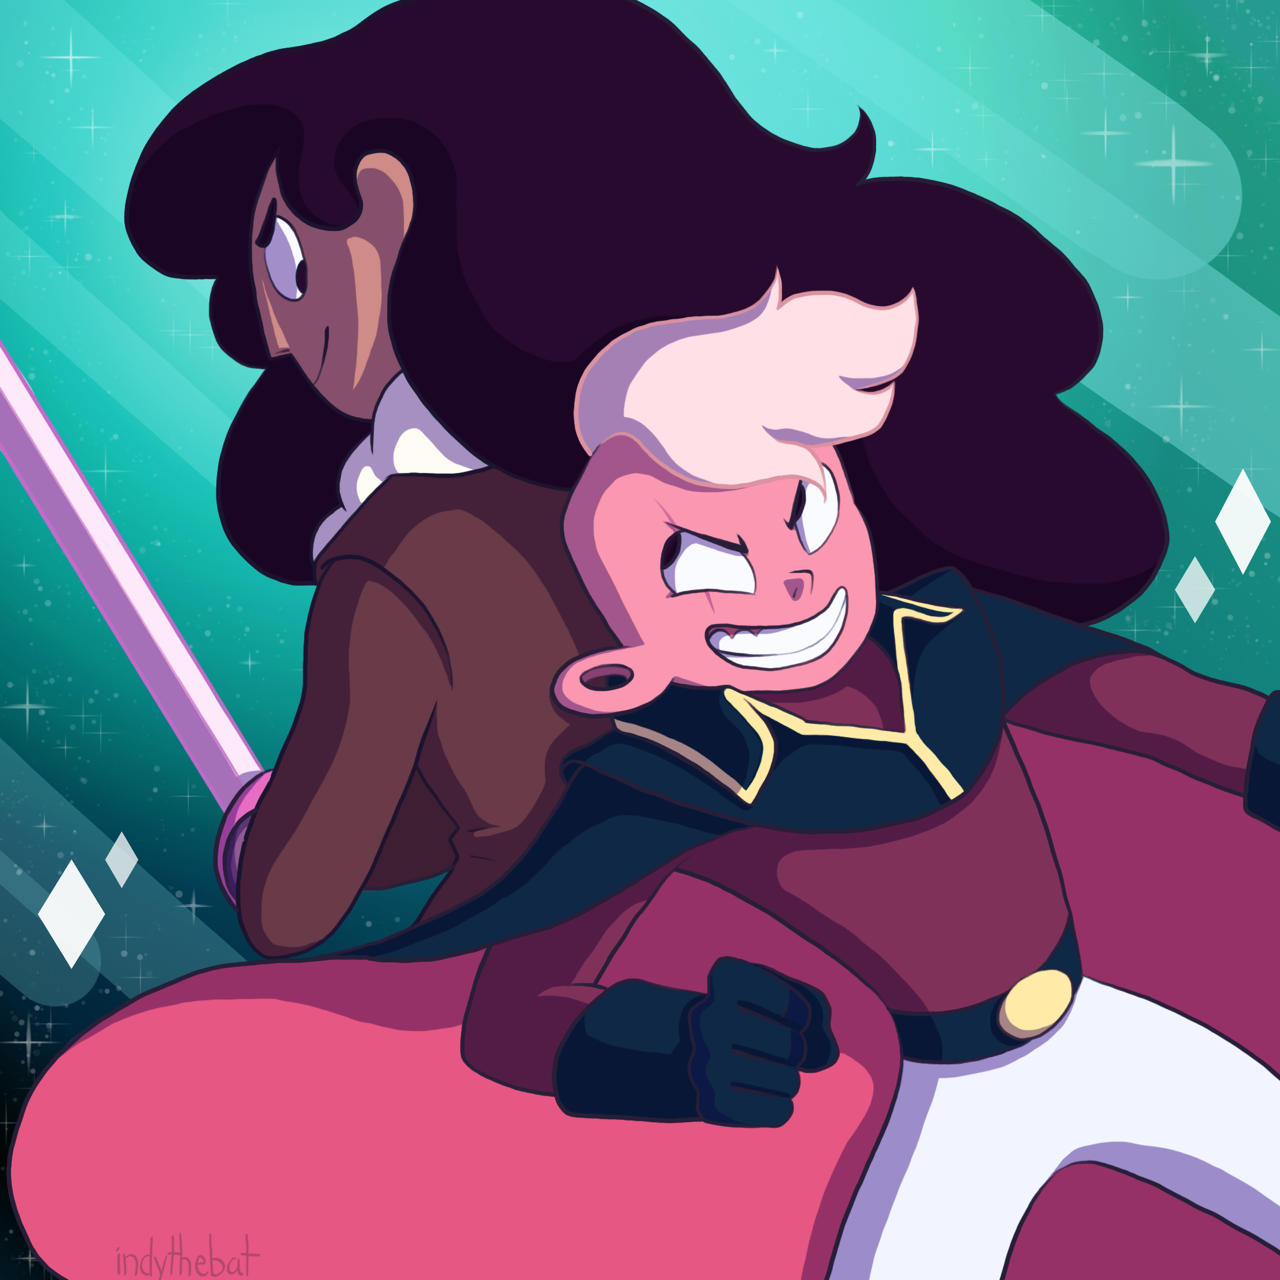 My two faves!! In space!!! 😁✨ (I made this like a month ago that’s why there’s some inconsistencies, like Stevonnie’s hair is long and Lars doesn’t have his plugs but oh well)